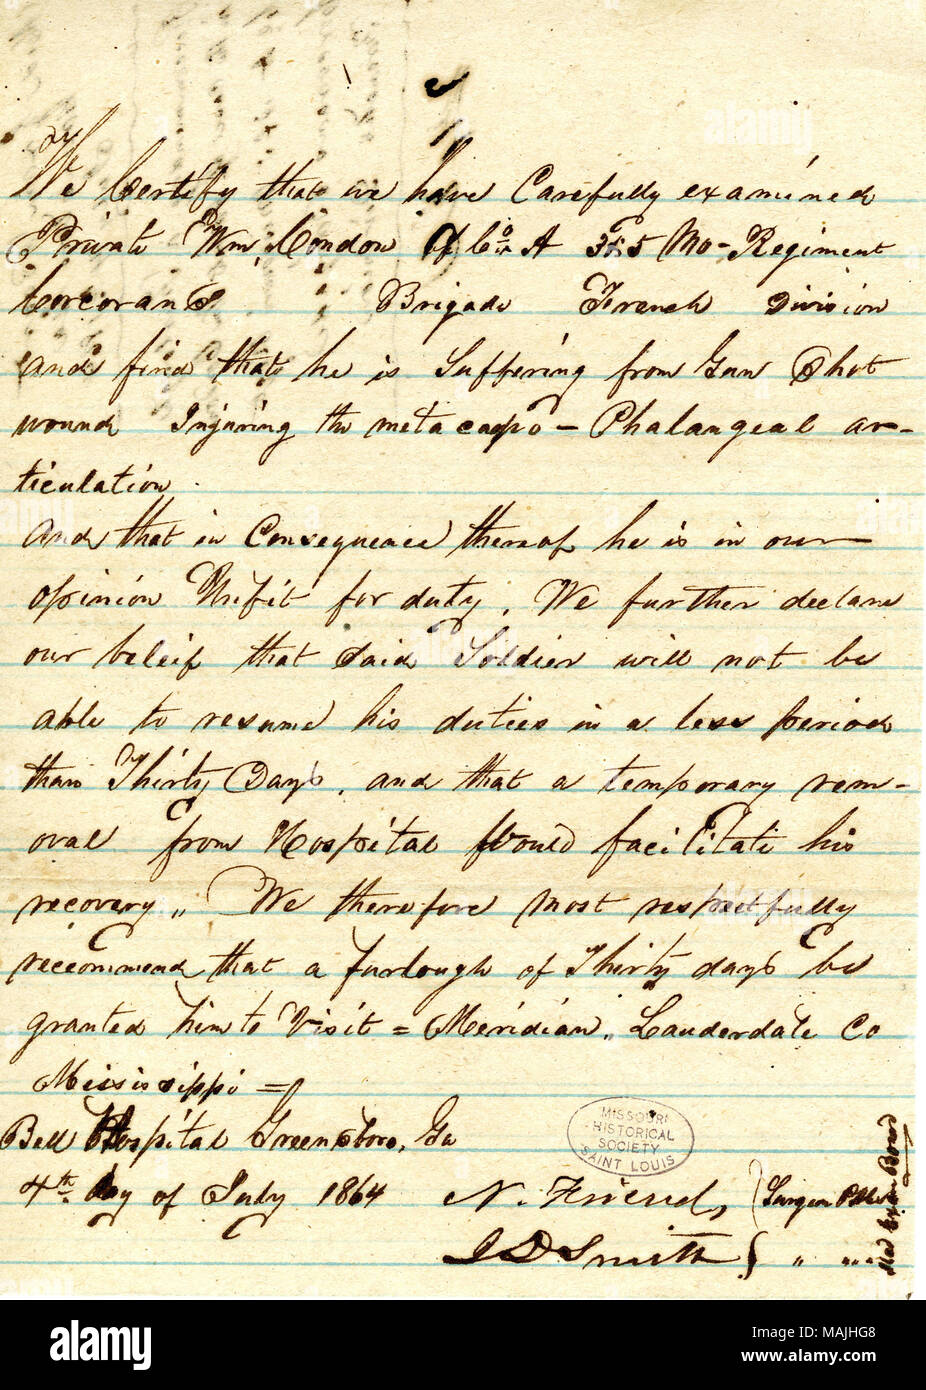 States that Condon has been examined and was declared unfit for duty due to a gunshot wound. Title: Medical certificate of Private William Condon, July 4, 1864  . 4 July 1864. Friend, N. Stock Photo